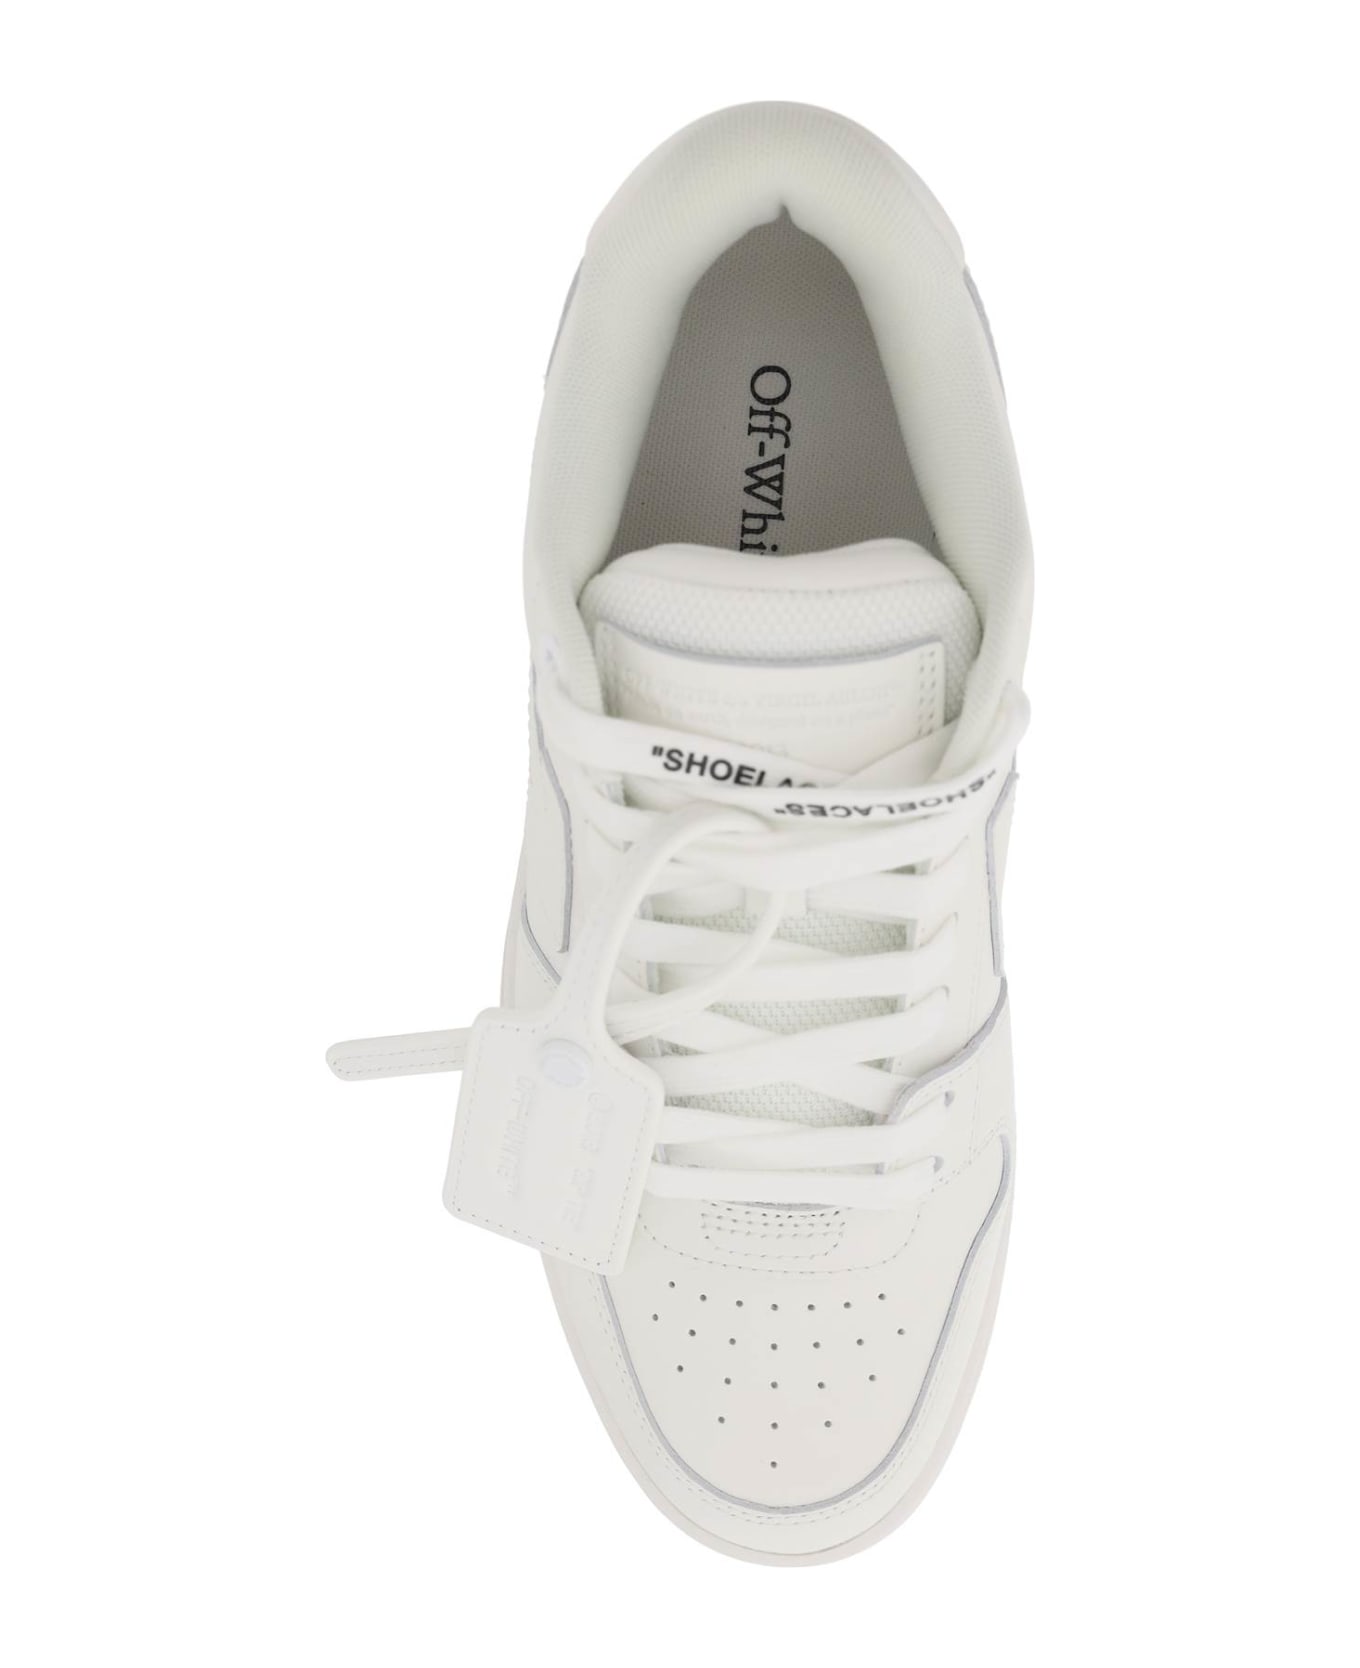 Off-White Out Of Office Sneakers - WHITE WHITE (White)